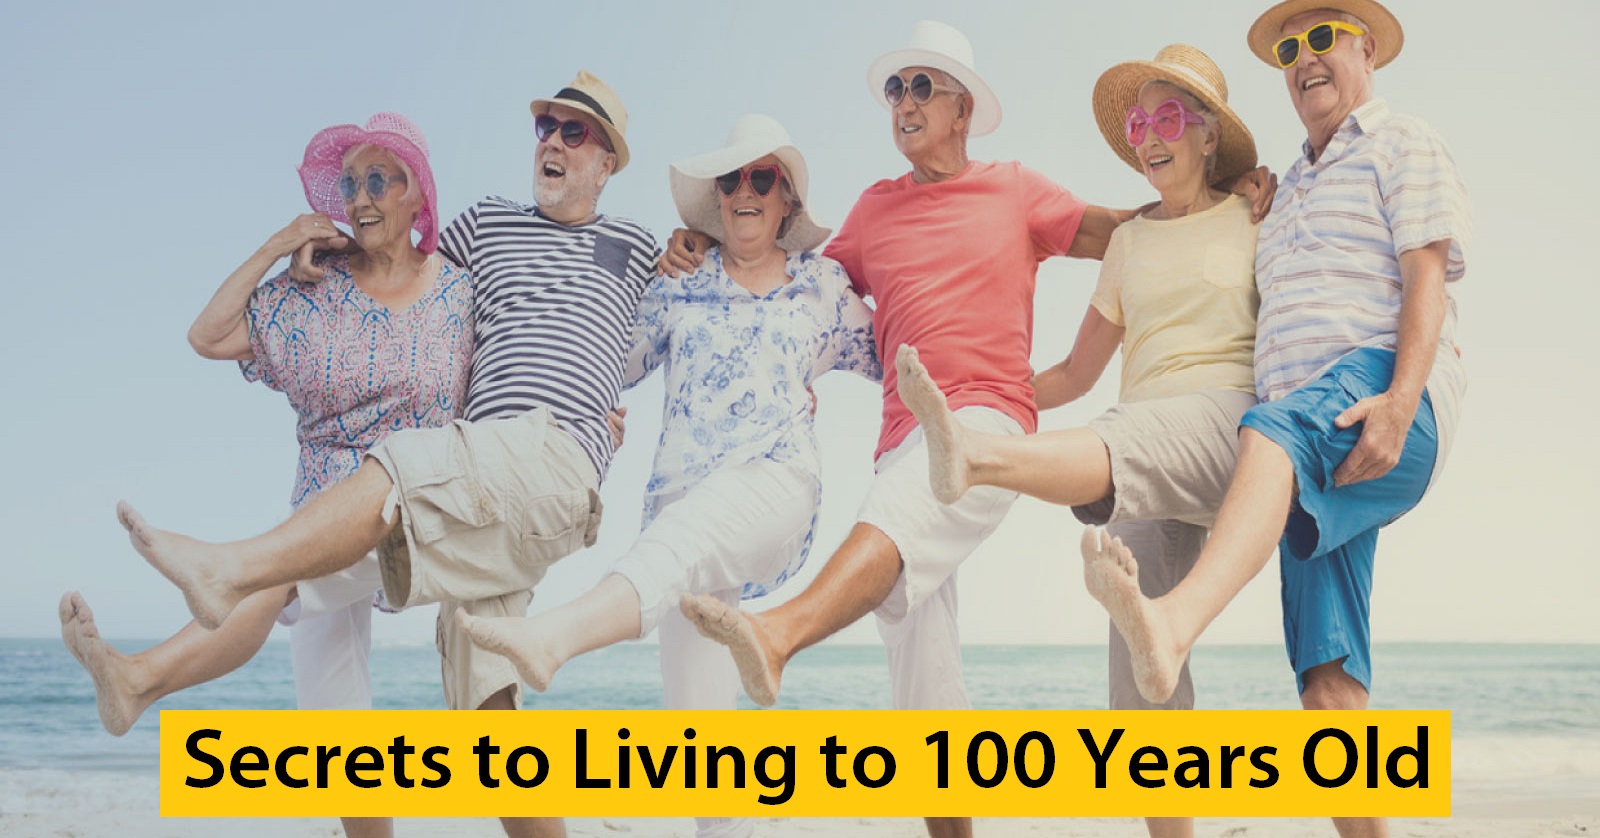 Secrets to Living to 100 Years Old